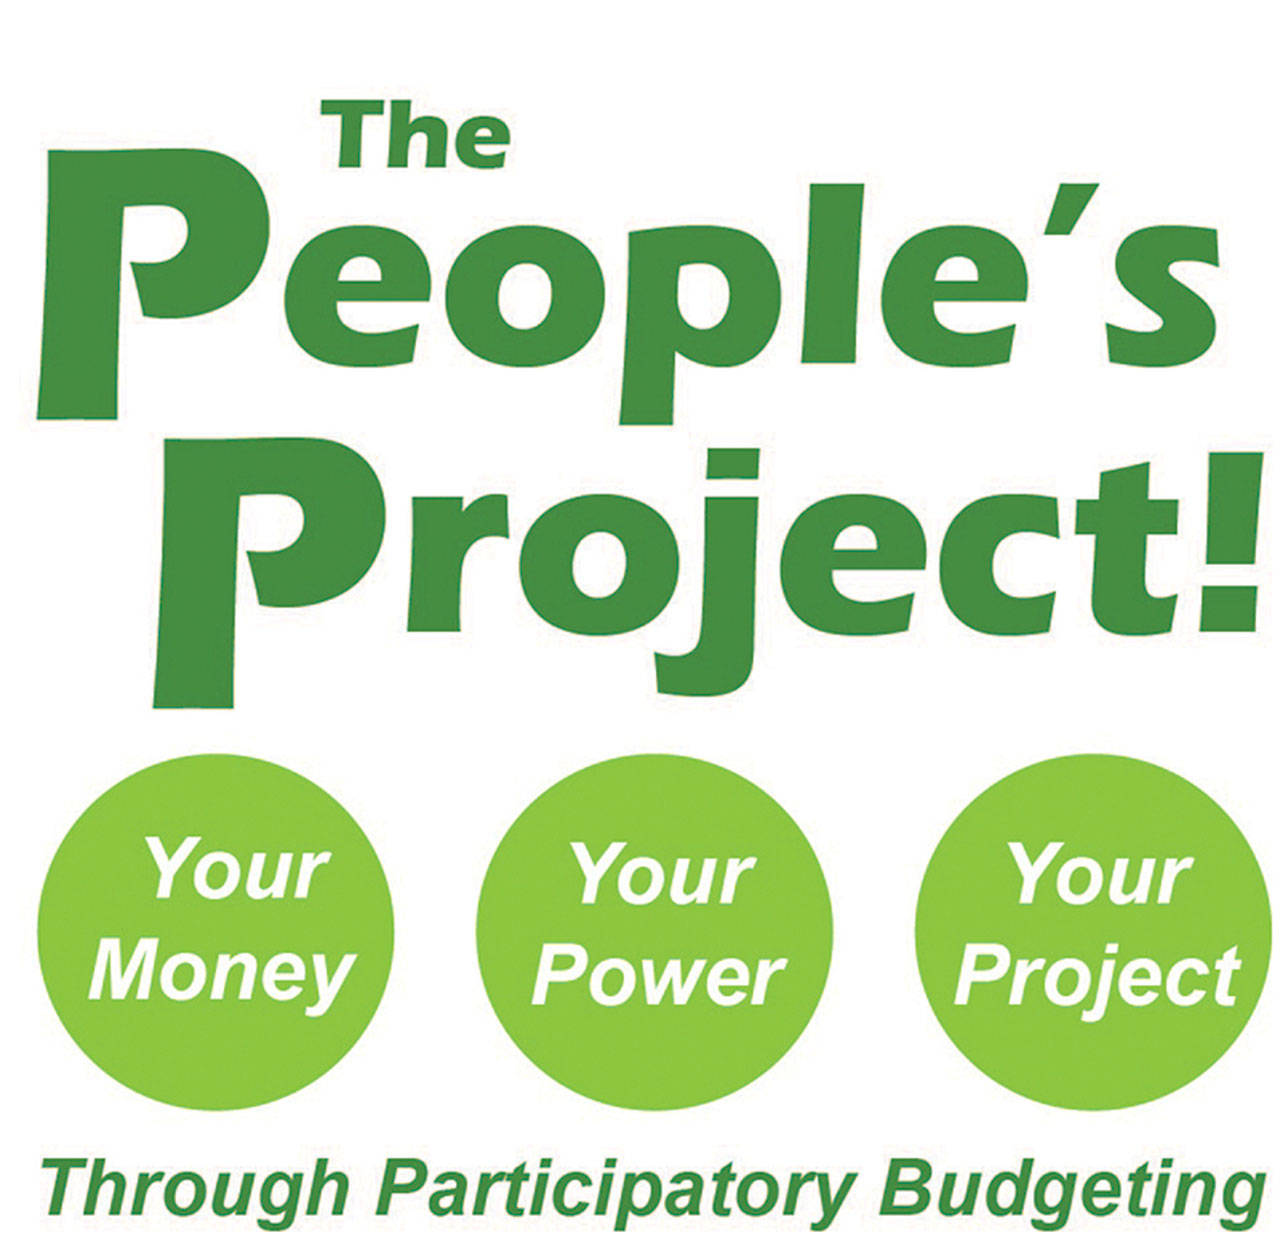 As a new effort to include residents in the budget process more, City of Sequim introduced The People’s Project where residents and visitors can vote May 3-4 and May 6-7 at the Sequim Civic Center and Sequim Irrigation Festival for different projects they’d like to see funded in 2020. Photos courtesy of the City of Sequim